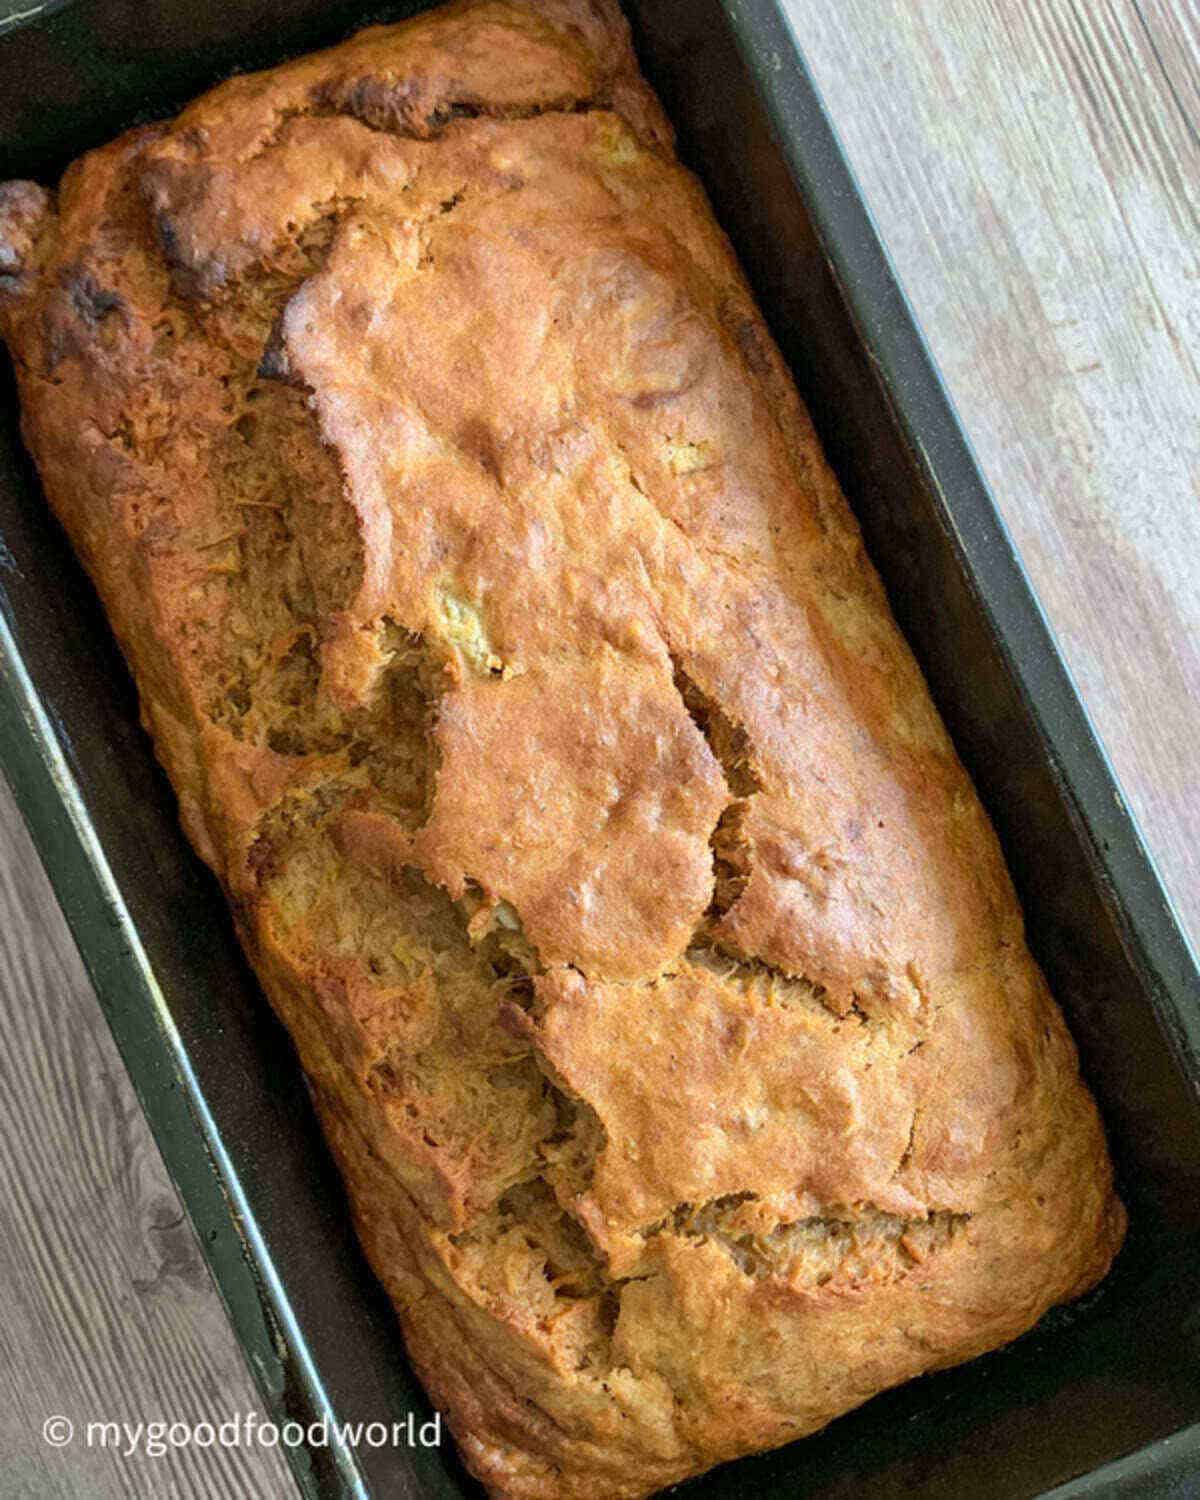 Freshly baked vegan bread with pumpkin placed on a light background.